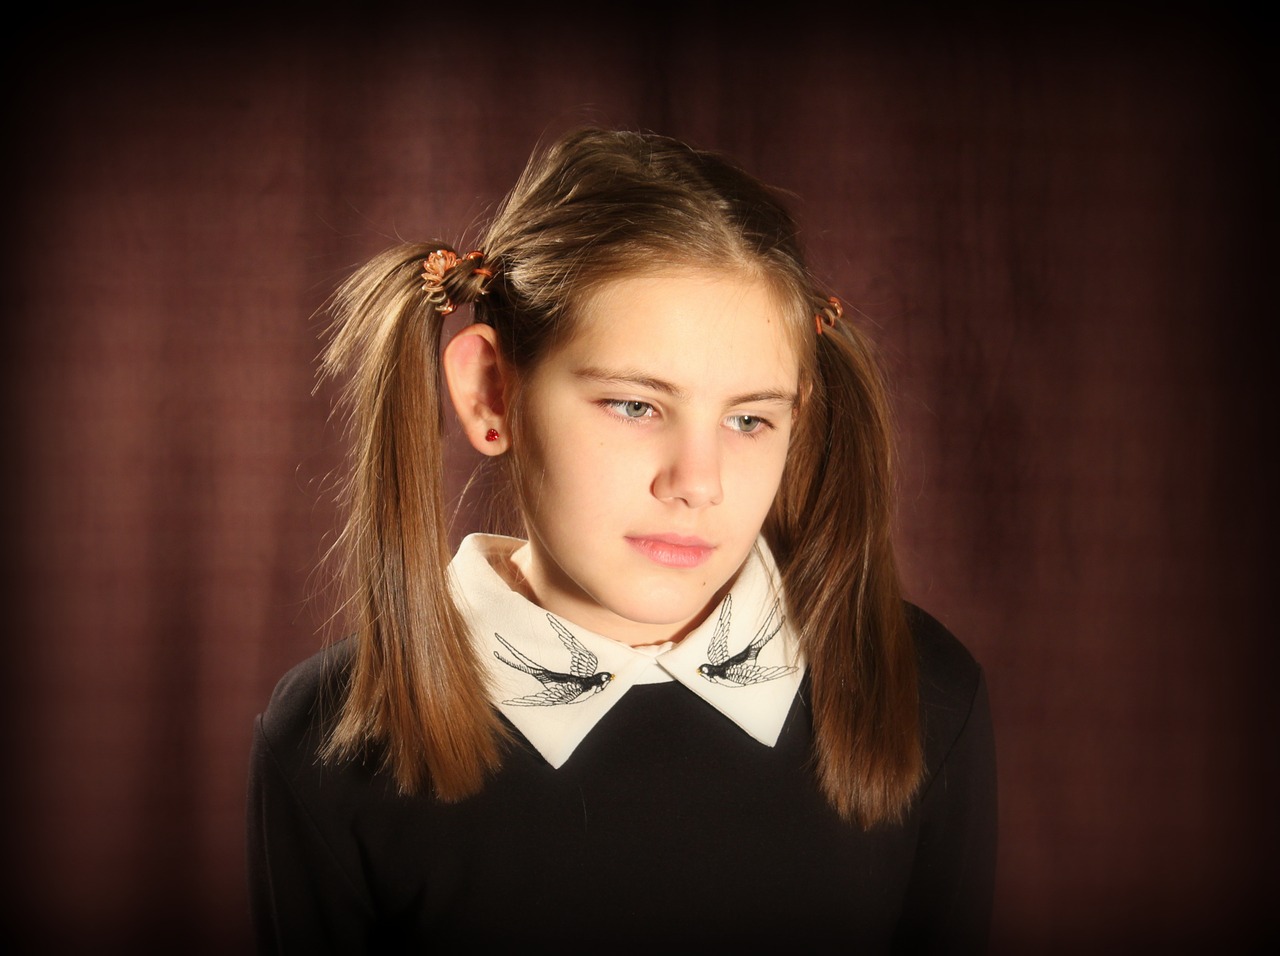 girl schoolboy pigtails free photo